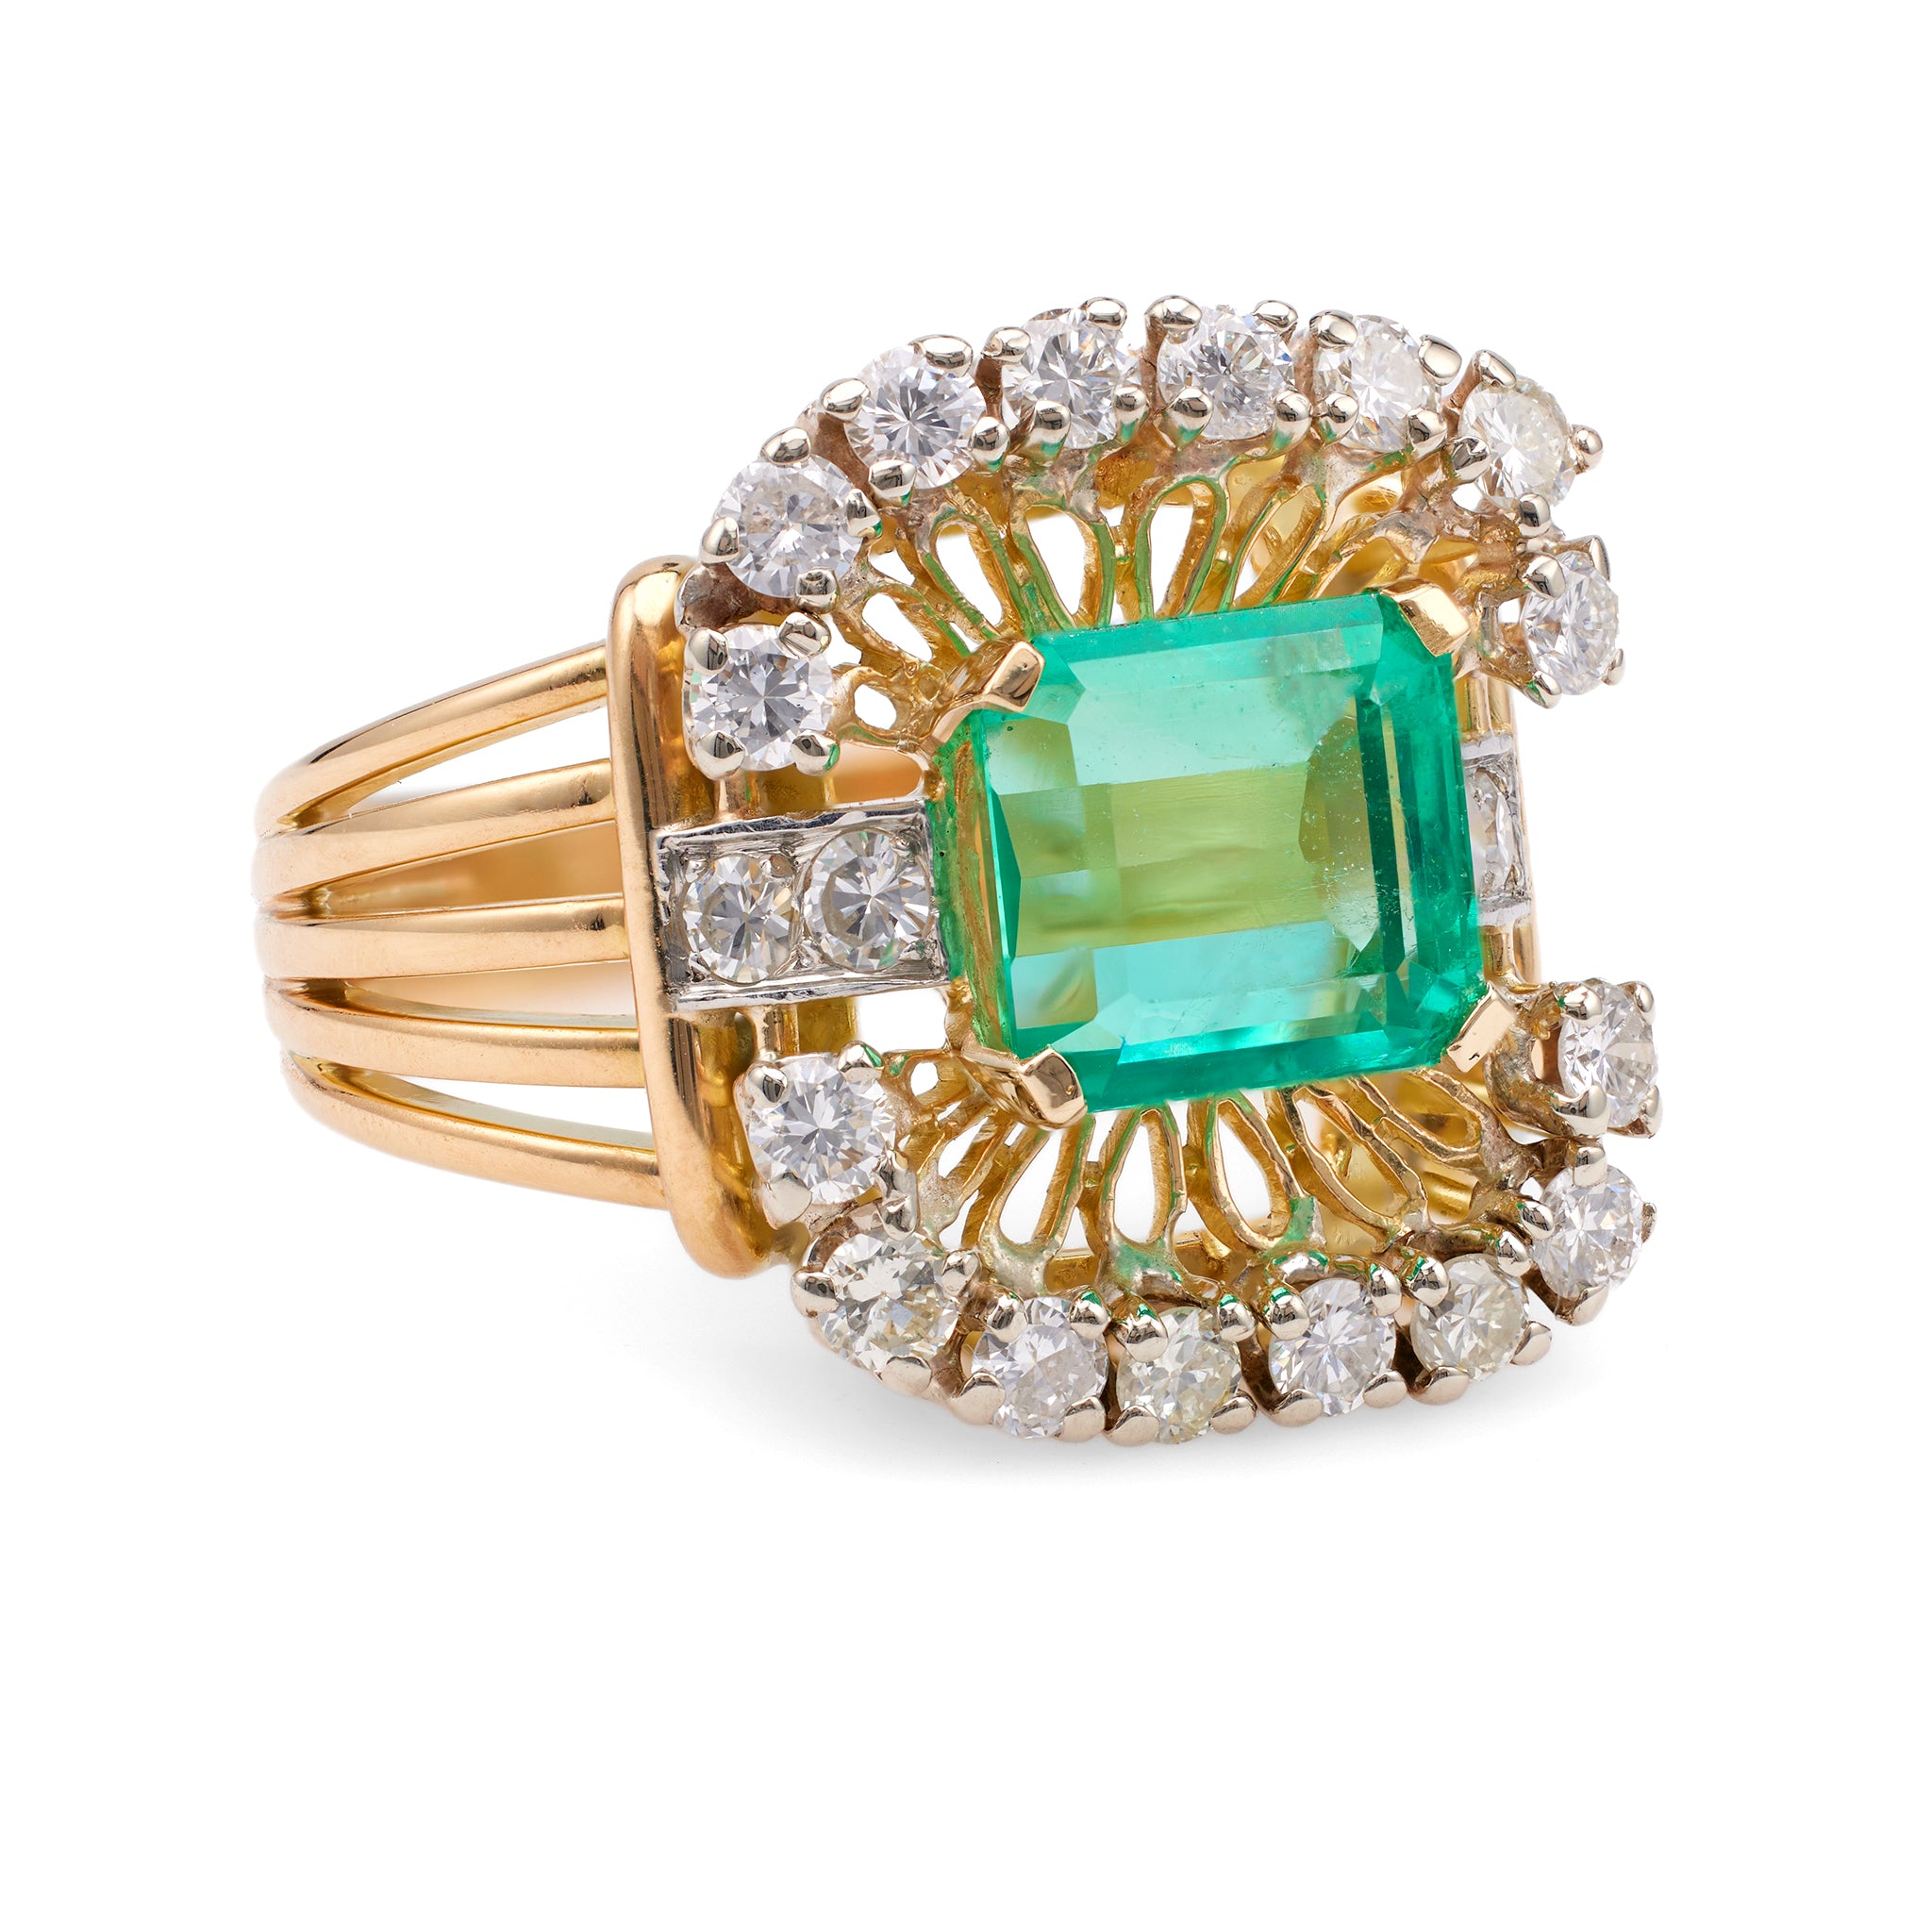 Retro French GIA 2.68 Carat Colombian Emerald Diamond 18k Yellow Gold Cocktail Ring Rings Jack Weir & Sons   